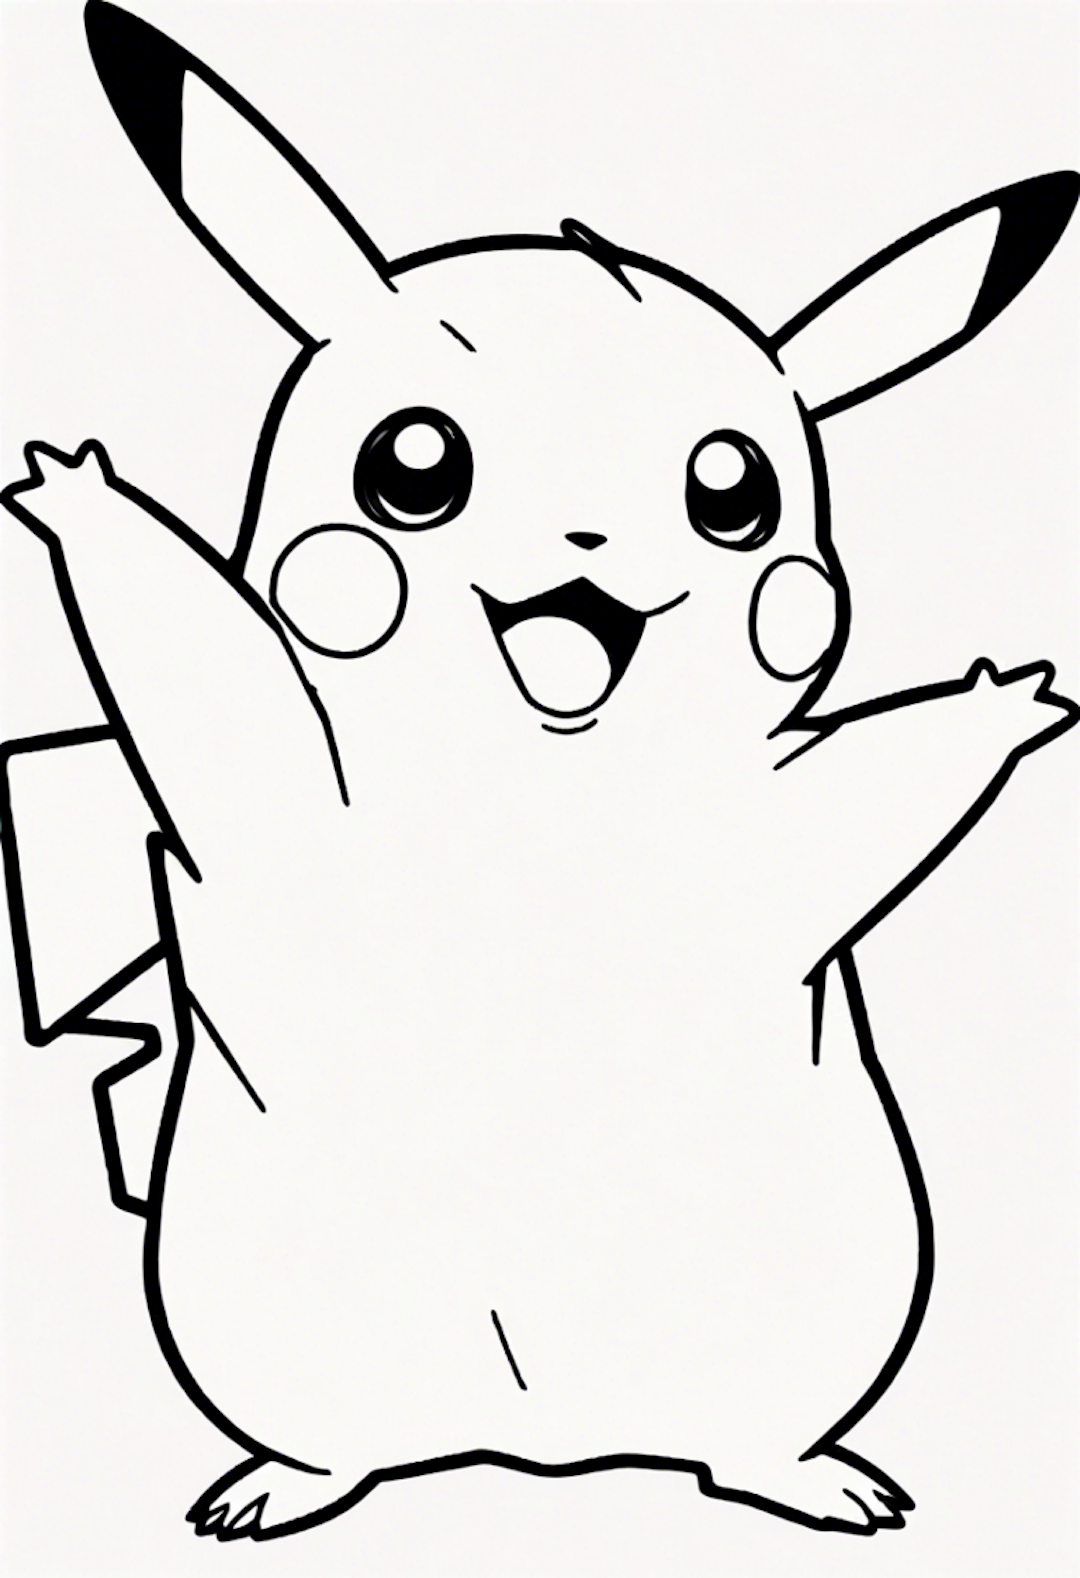 Surprised Pikachu coloring pages